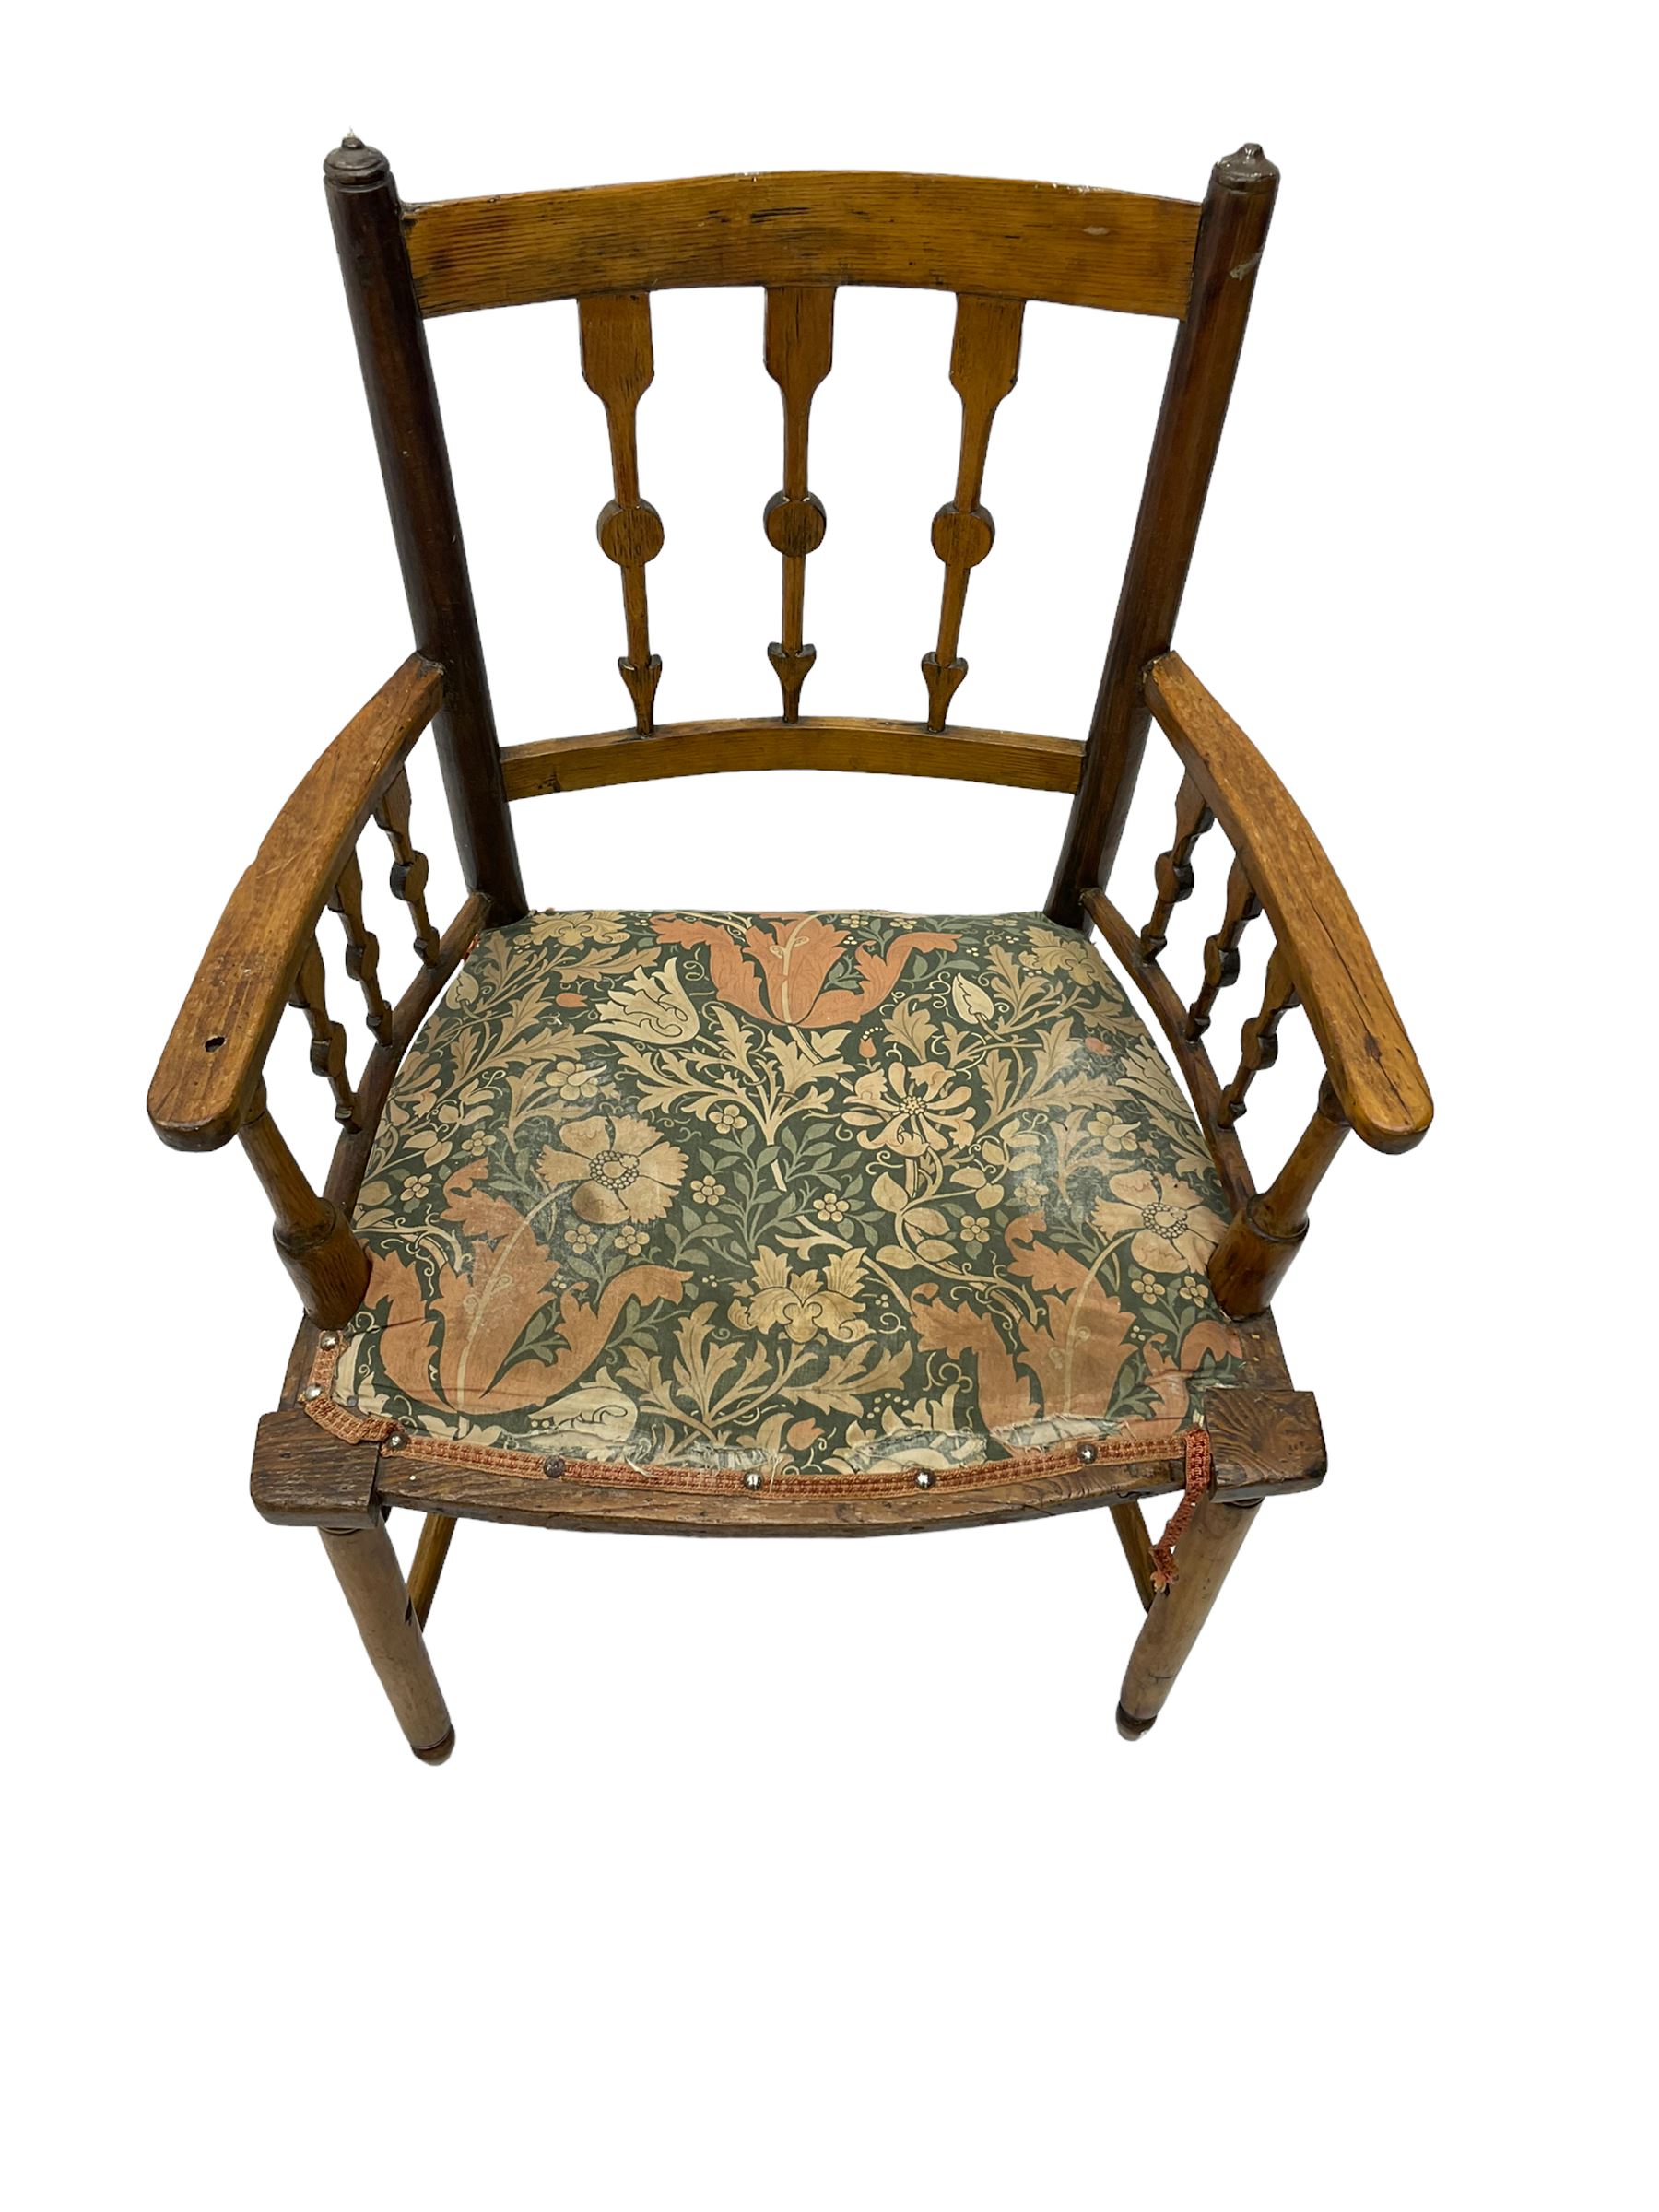 19th century ash and beech Sussex type elbow chair - Image 2 of 6